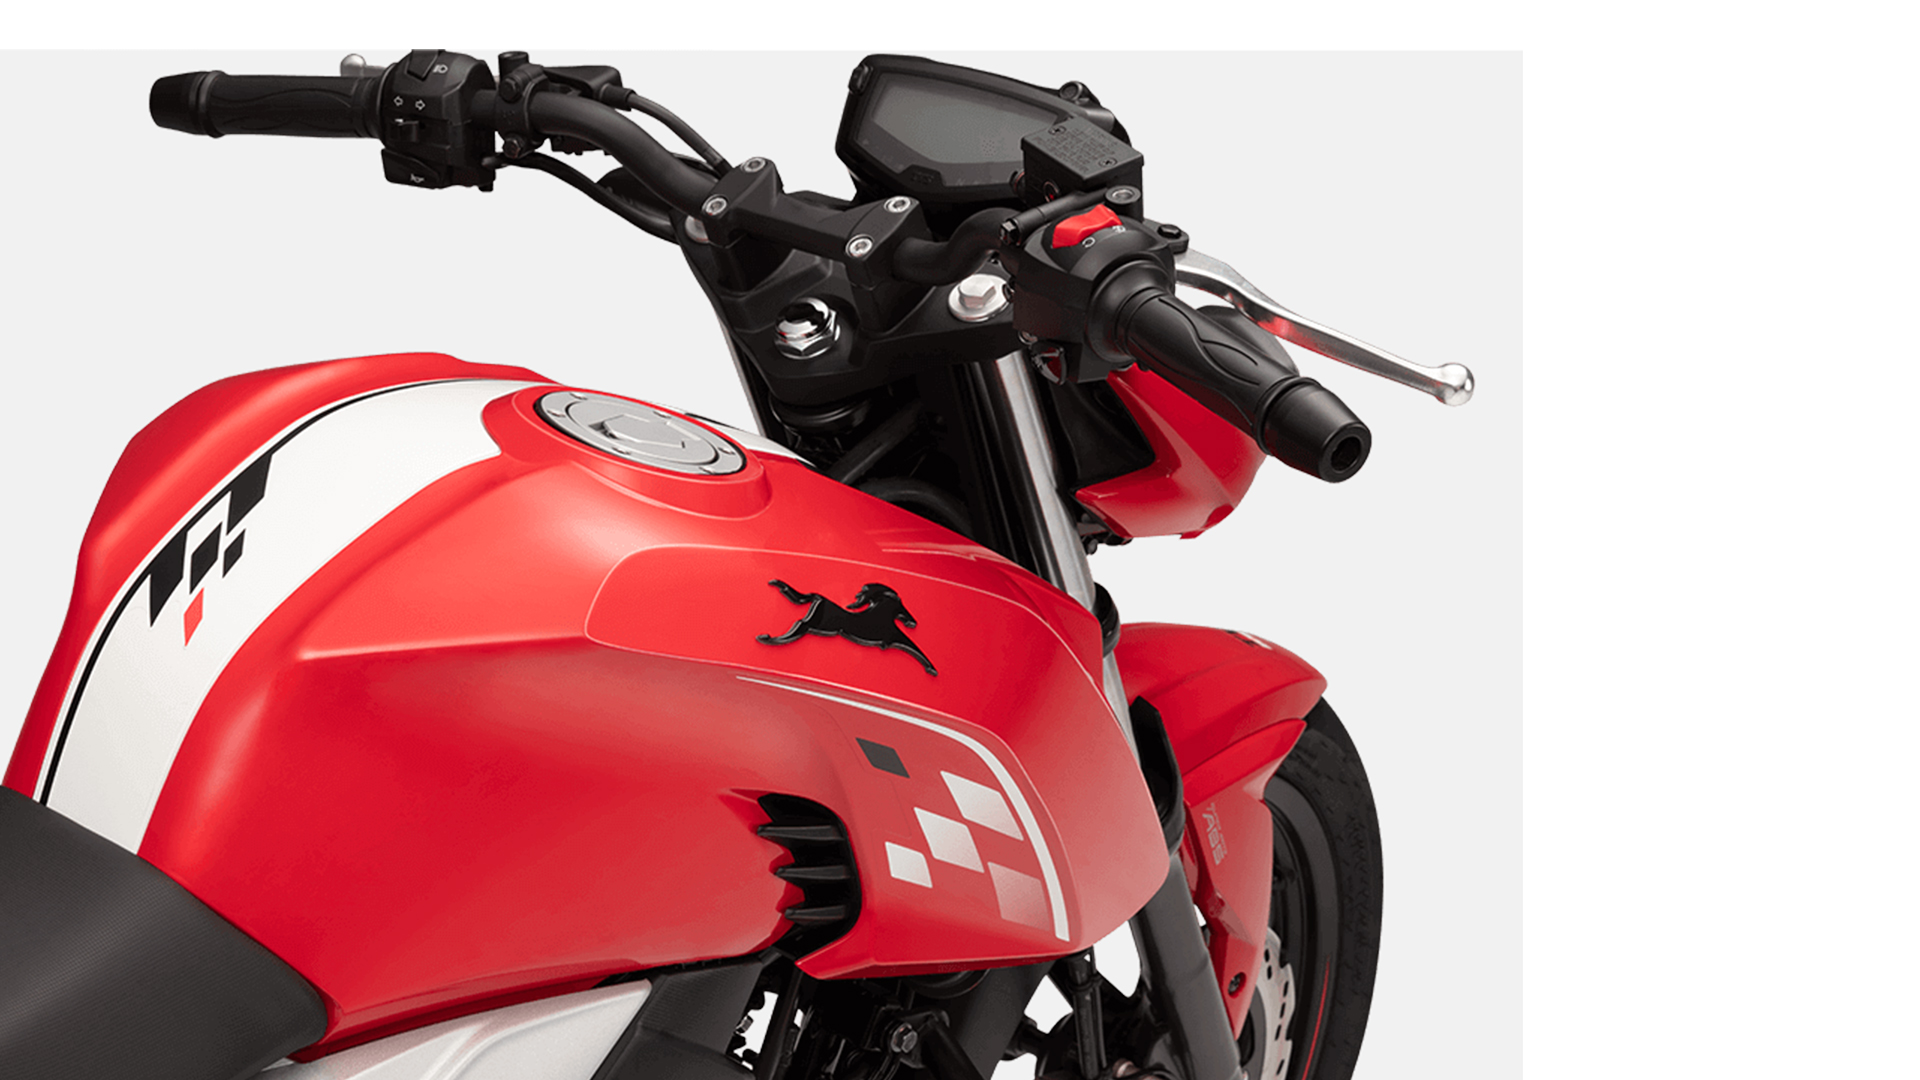 Tvs Apache Rtr 160 4v Drum Price Mileage Reviews Specification Gallery Overdrive